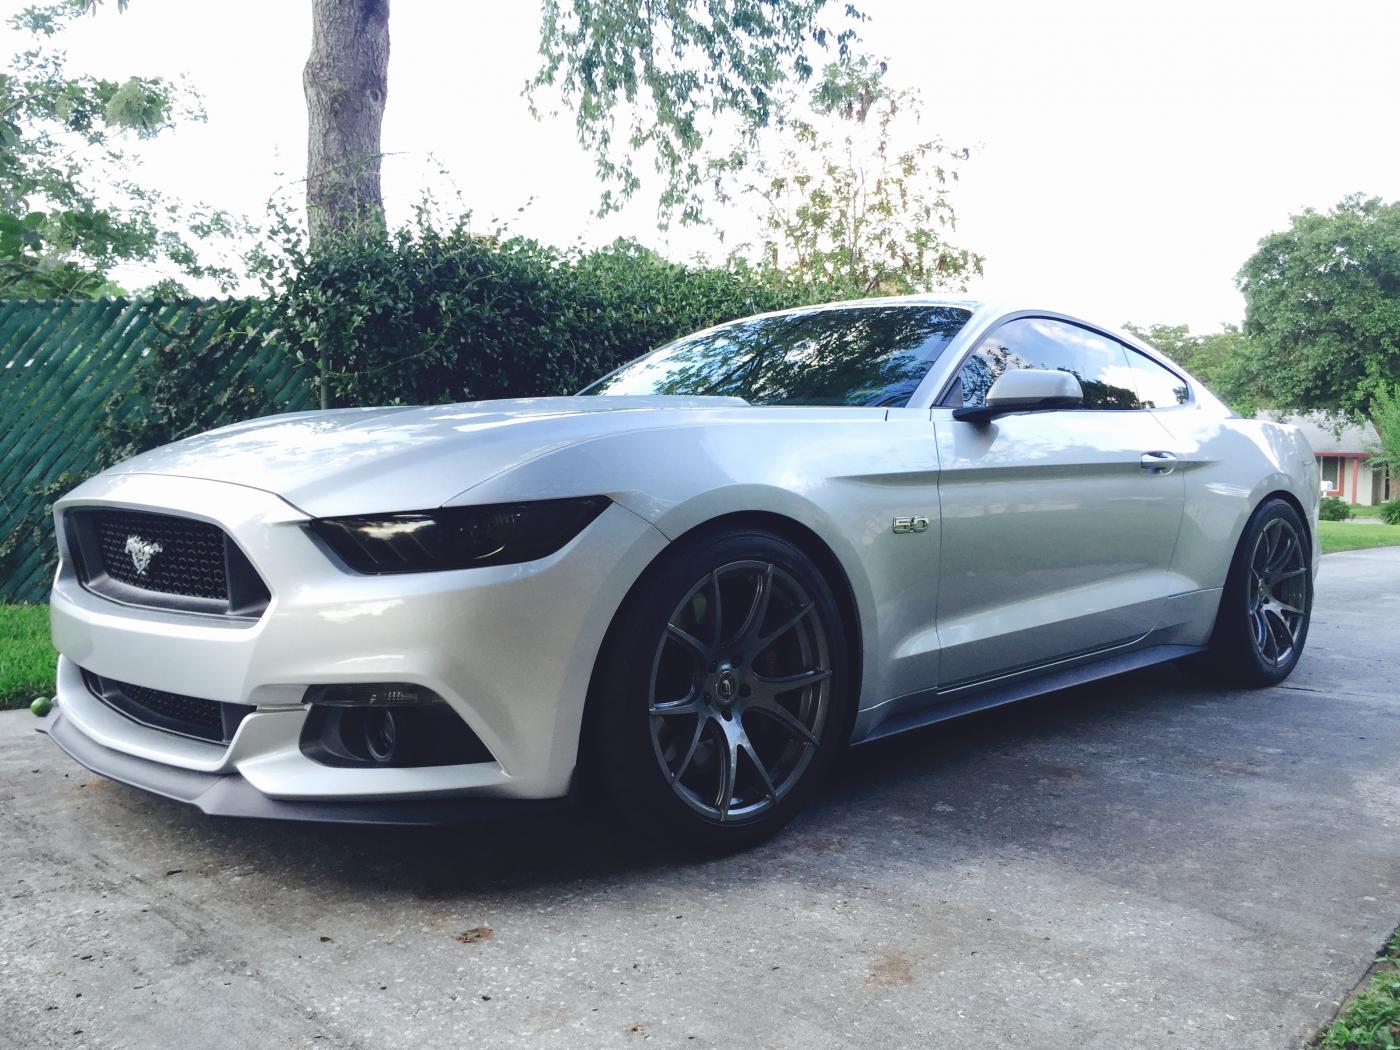 INGOT SILVER S550 MUSTANG Thread | Page 54 | 2015+ S550 Mustang Forum ...